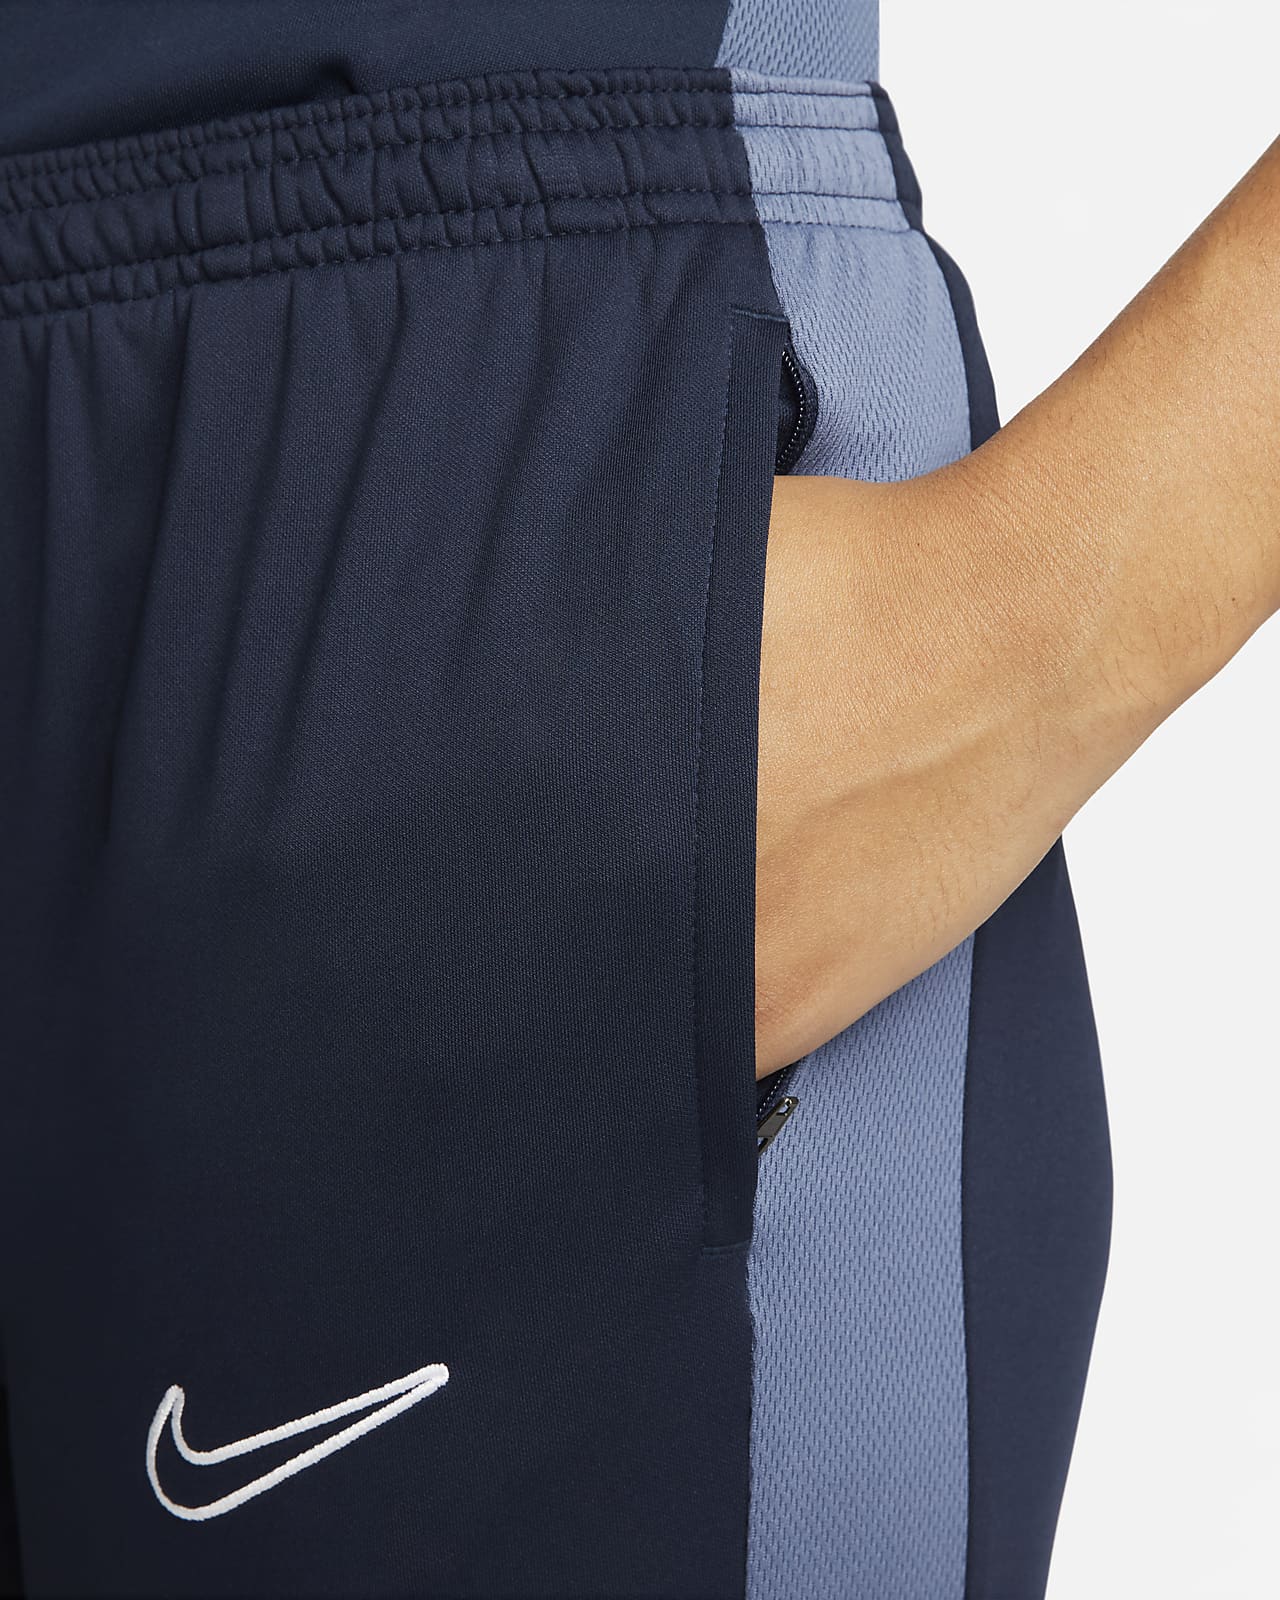 Women's Dri-FIT Academy Pant from Nike